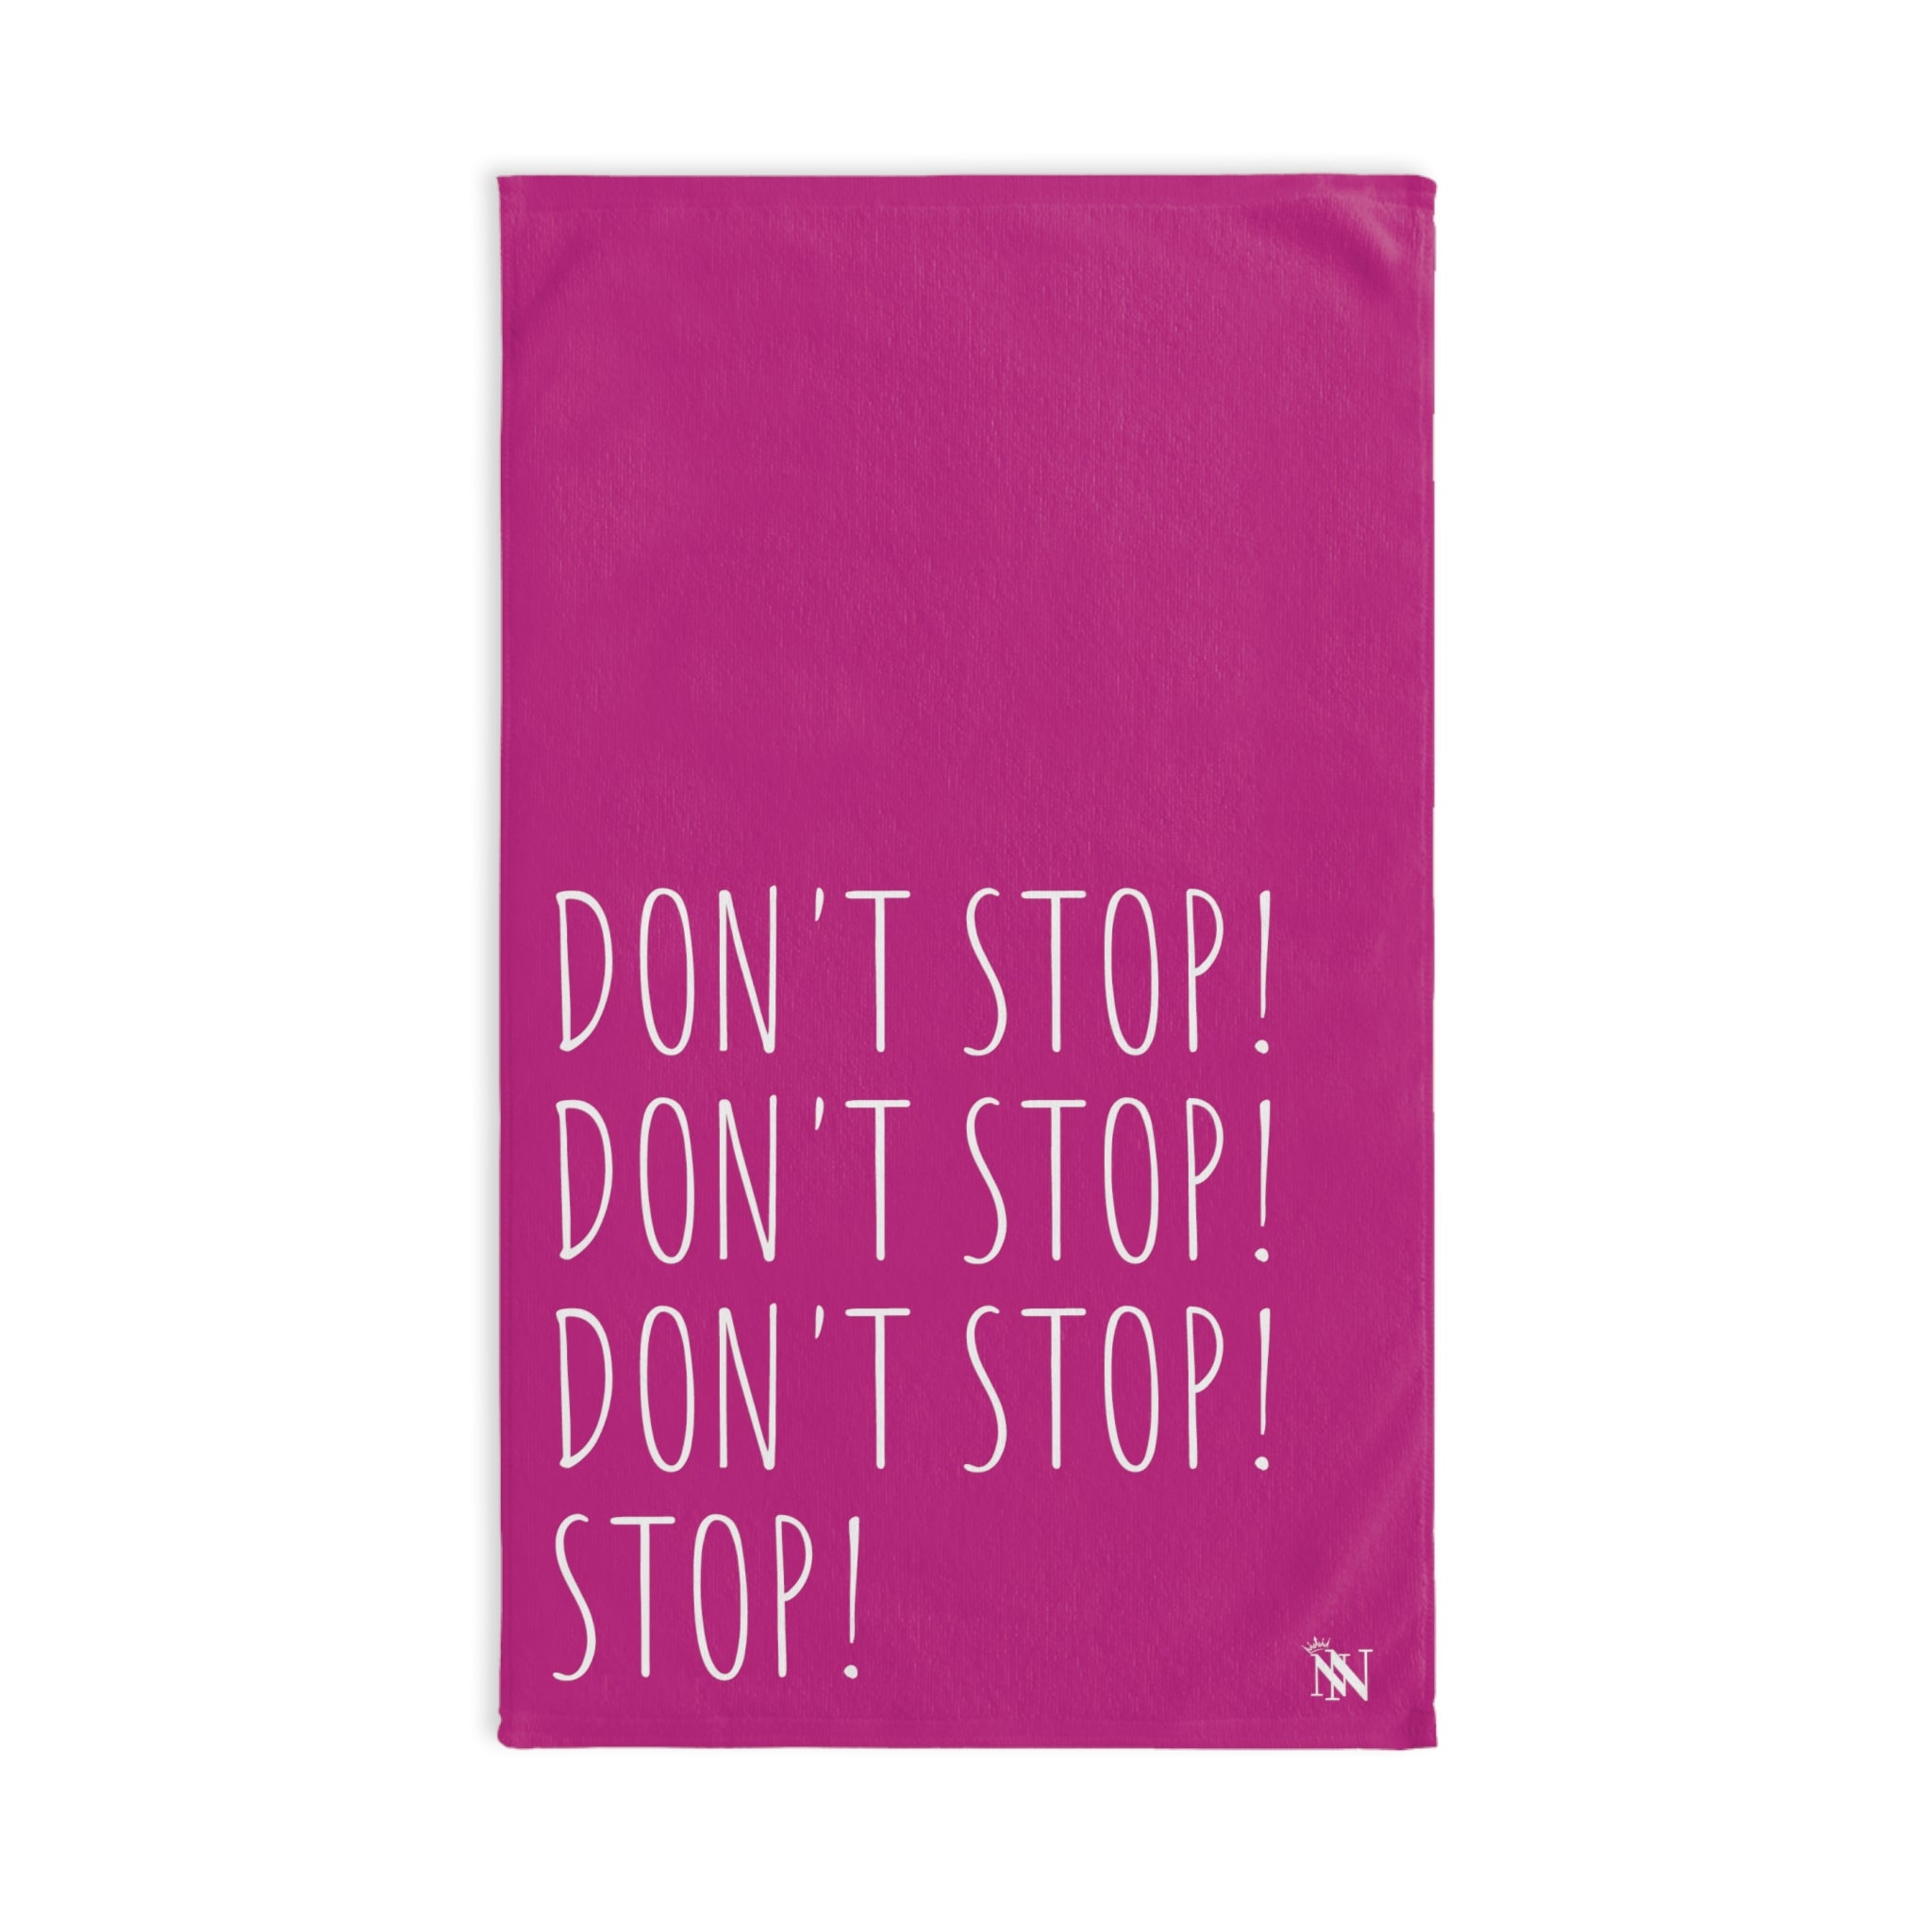 Don't Stop! Fuscia | Funny Gifts for Men - Gifts for Him - Birthday Gifts for Men, Him, Husband, Boyfriend, New Couple Gifts, Fathers & Valentines Day Gifts, Hand Towels NECTAR NAPKINS